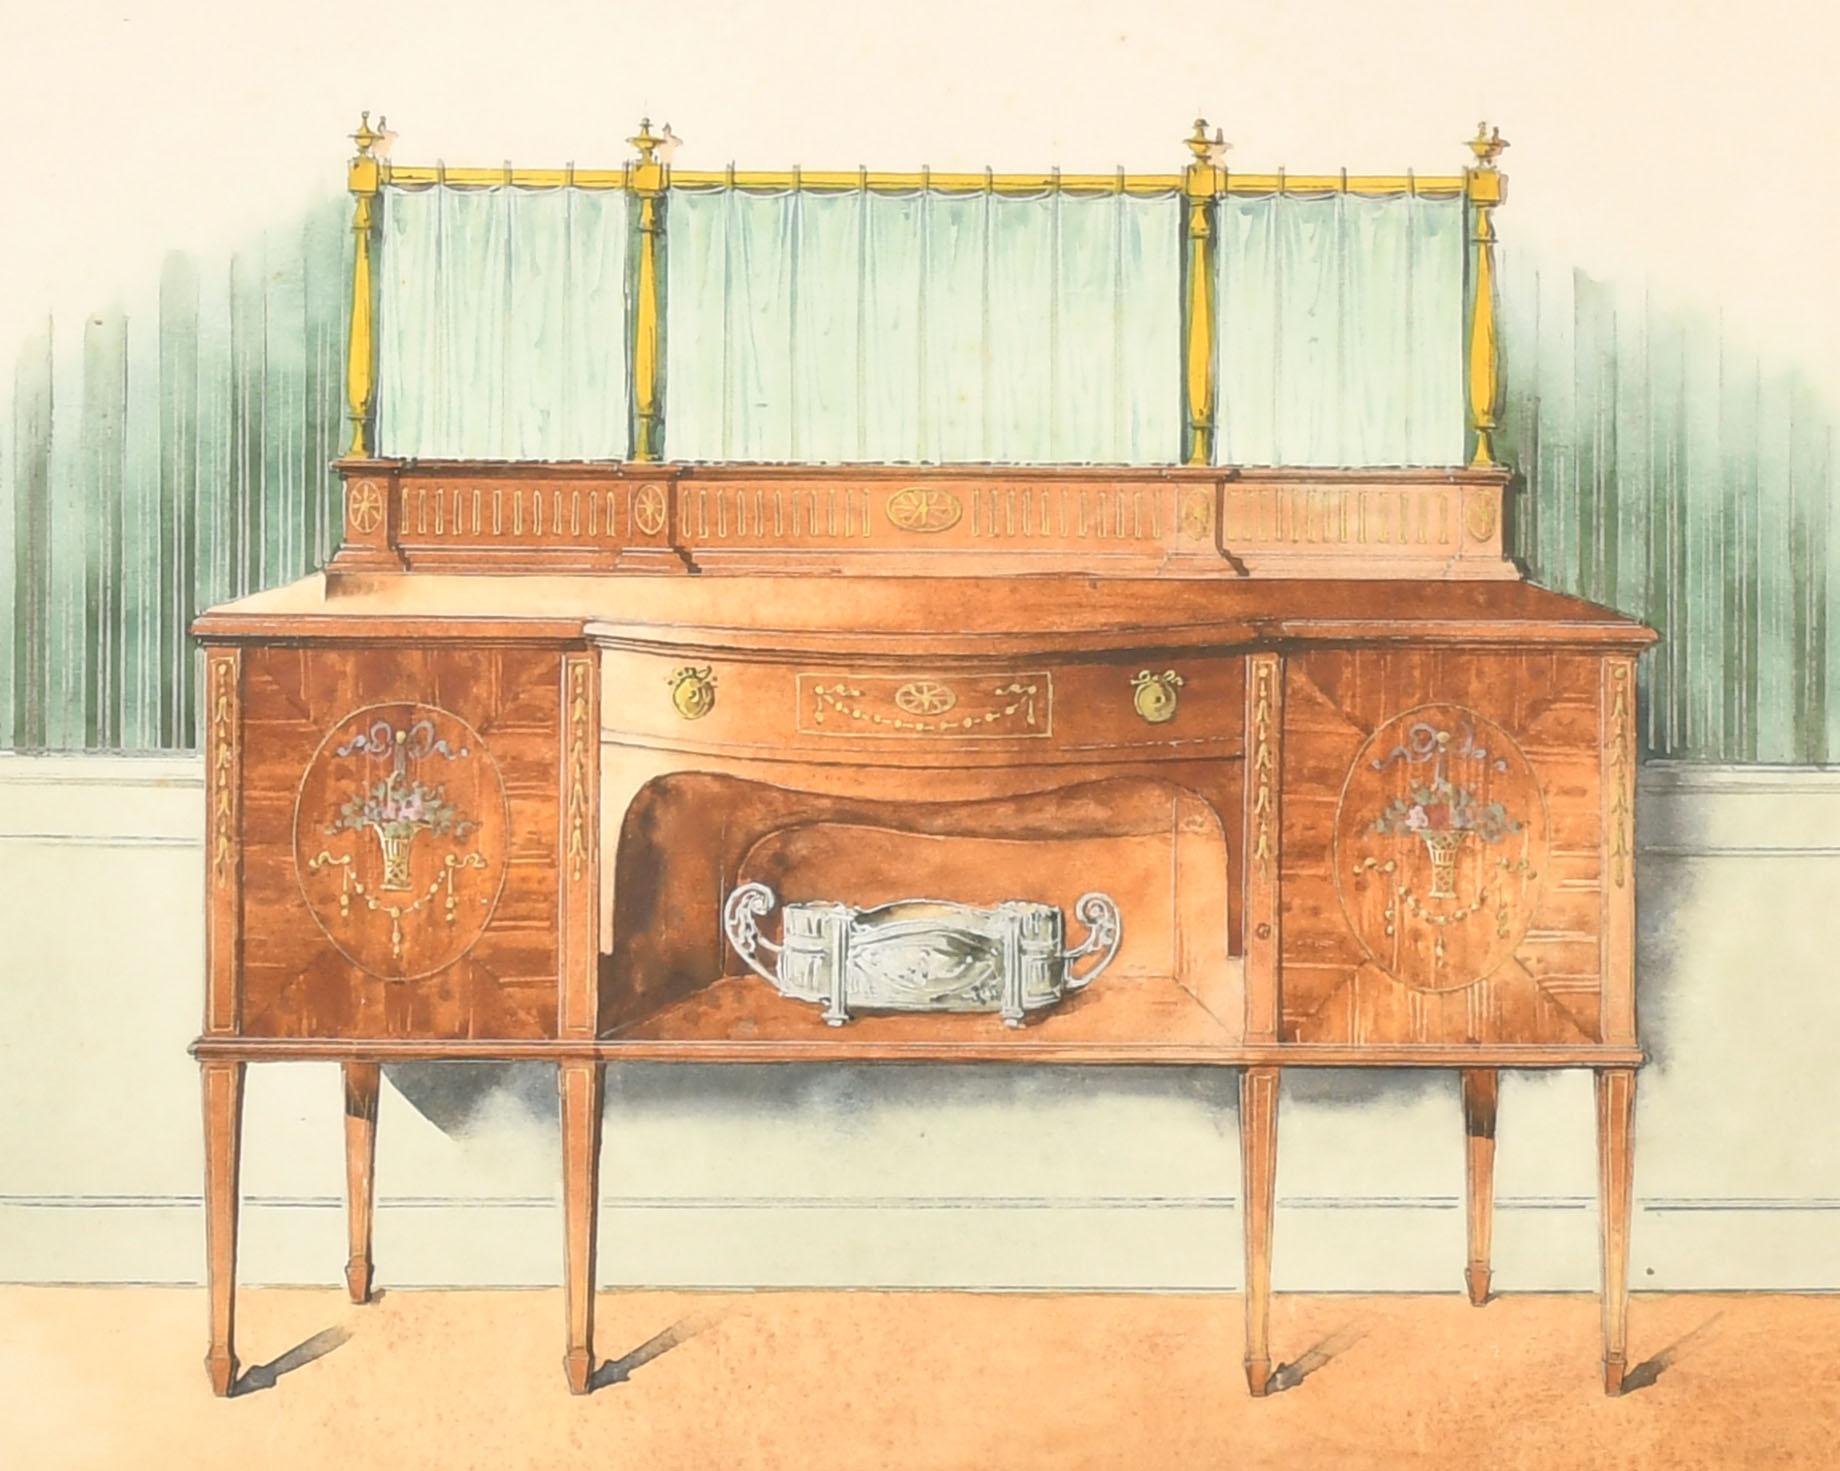 19th Century English School. Study of a Sideboard, Watercolour, Inscribed on labels verso, 8.25" x